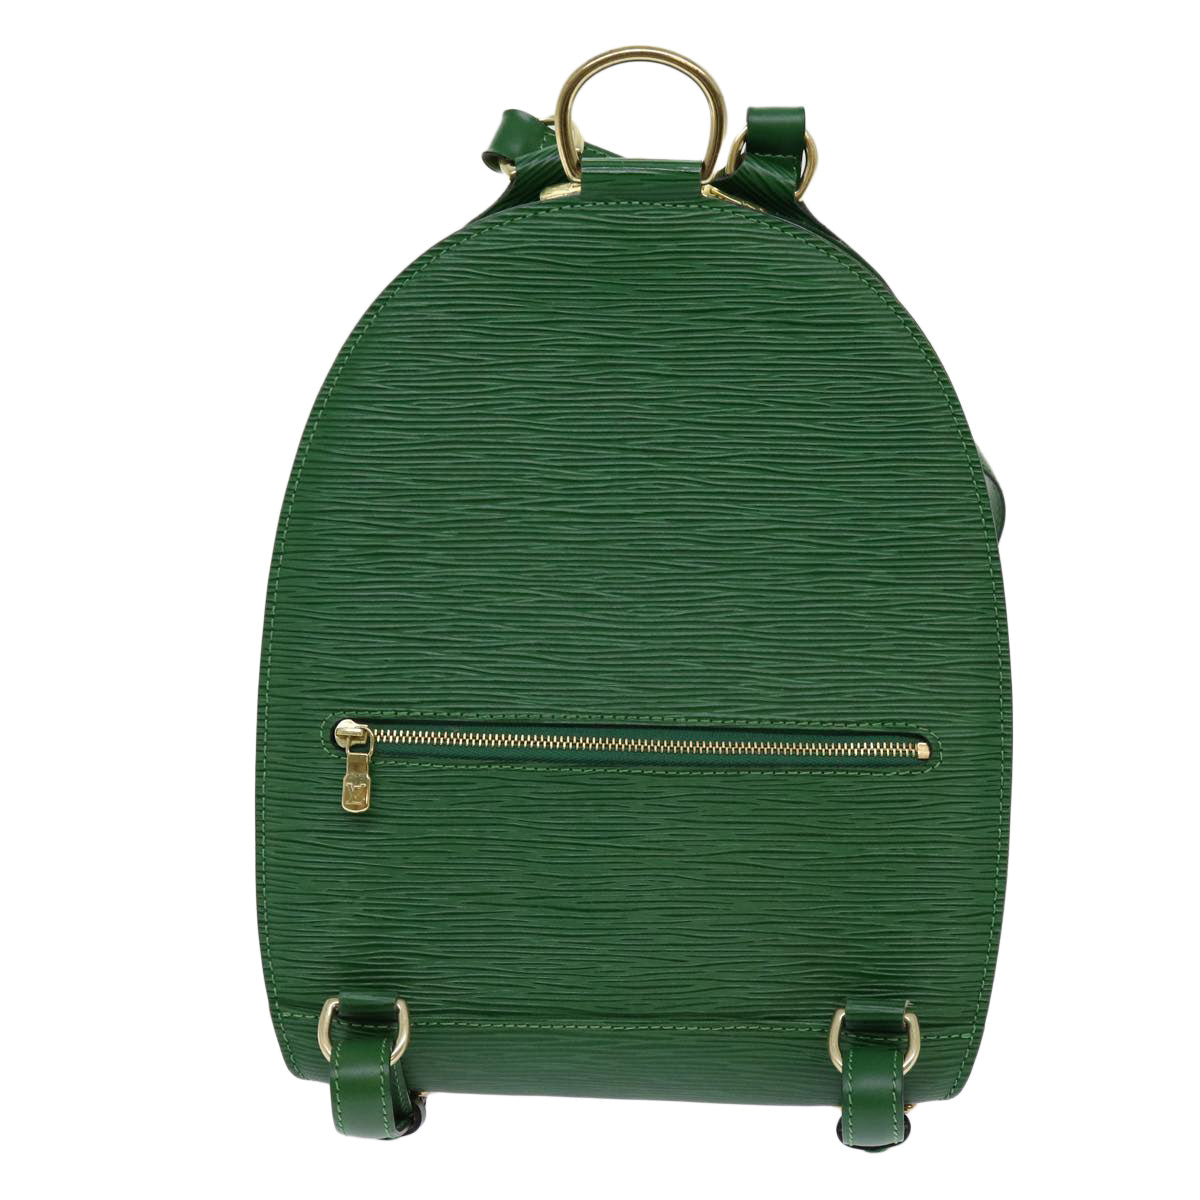 LOUIS VUITTON Epi Mabillon Backpack Green M52234 LV Auth ep2673 - 0